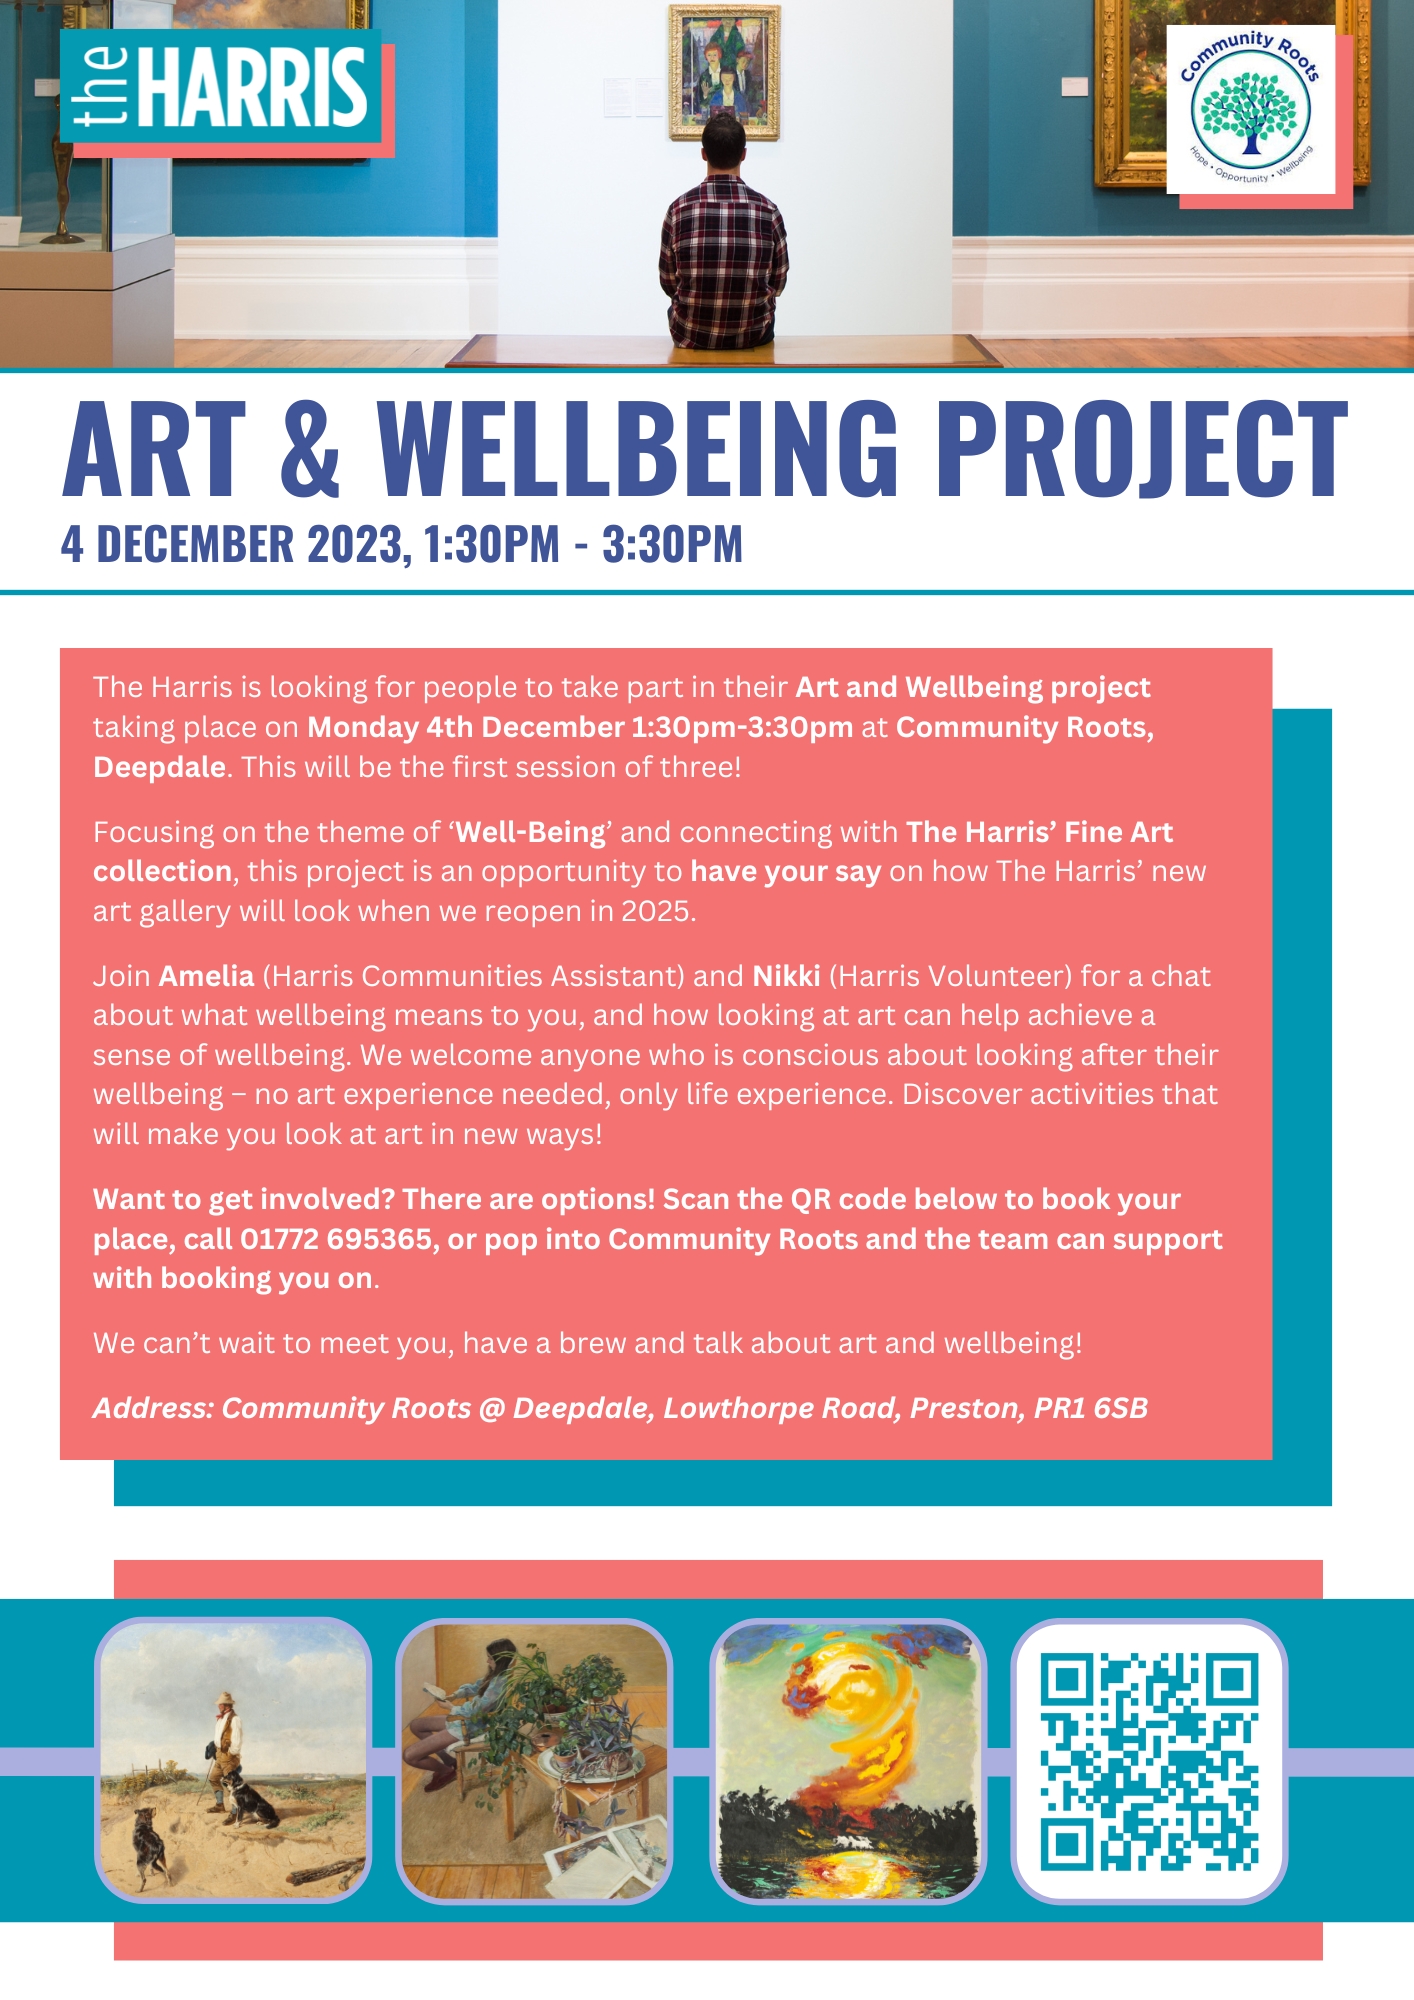 Art & Wellbeing Project Poster